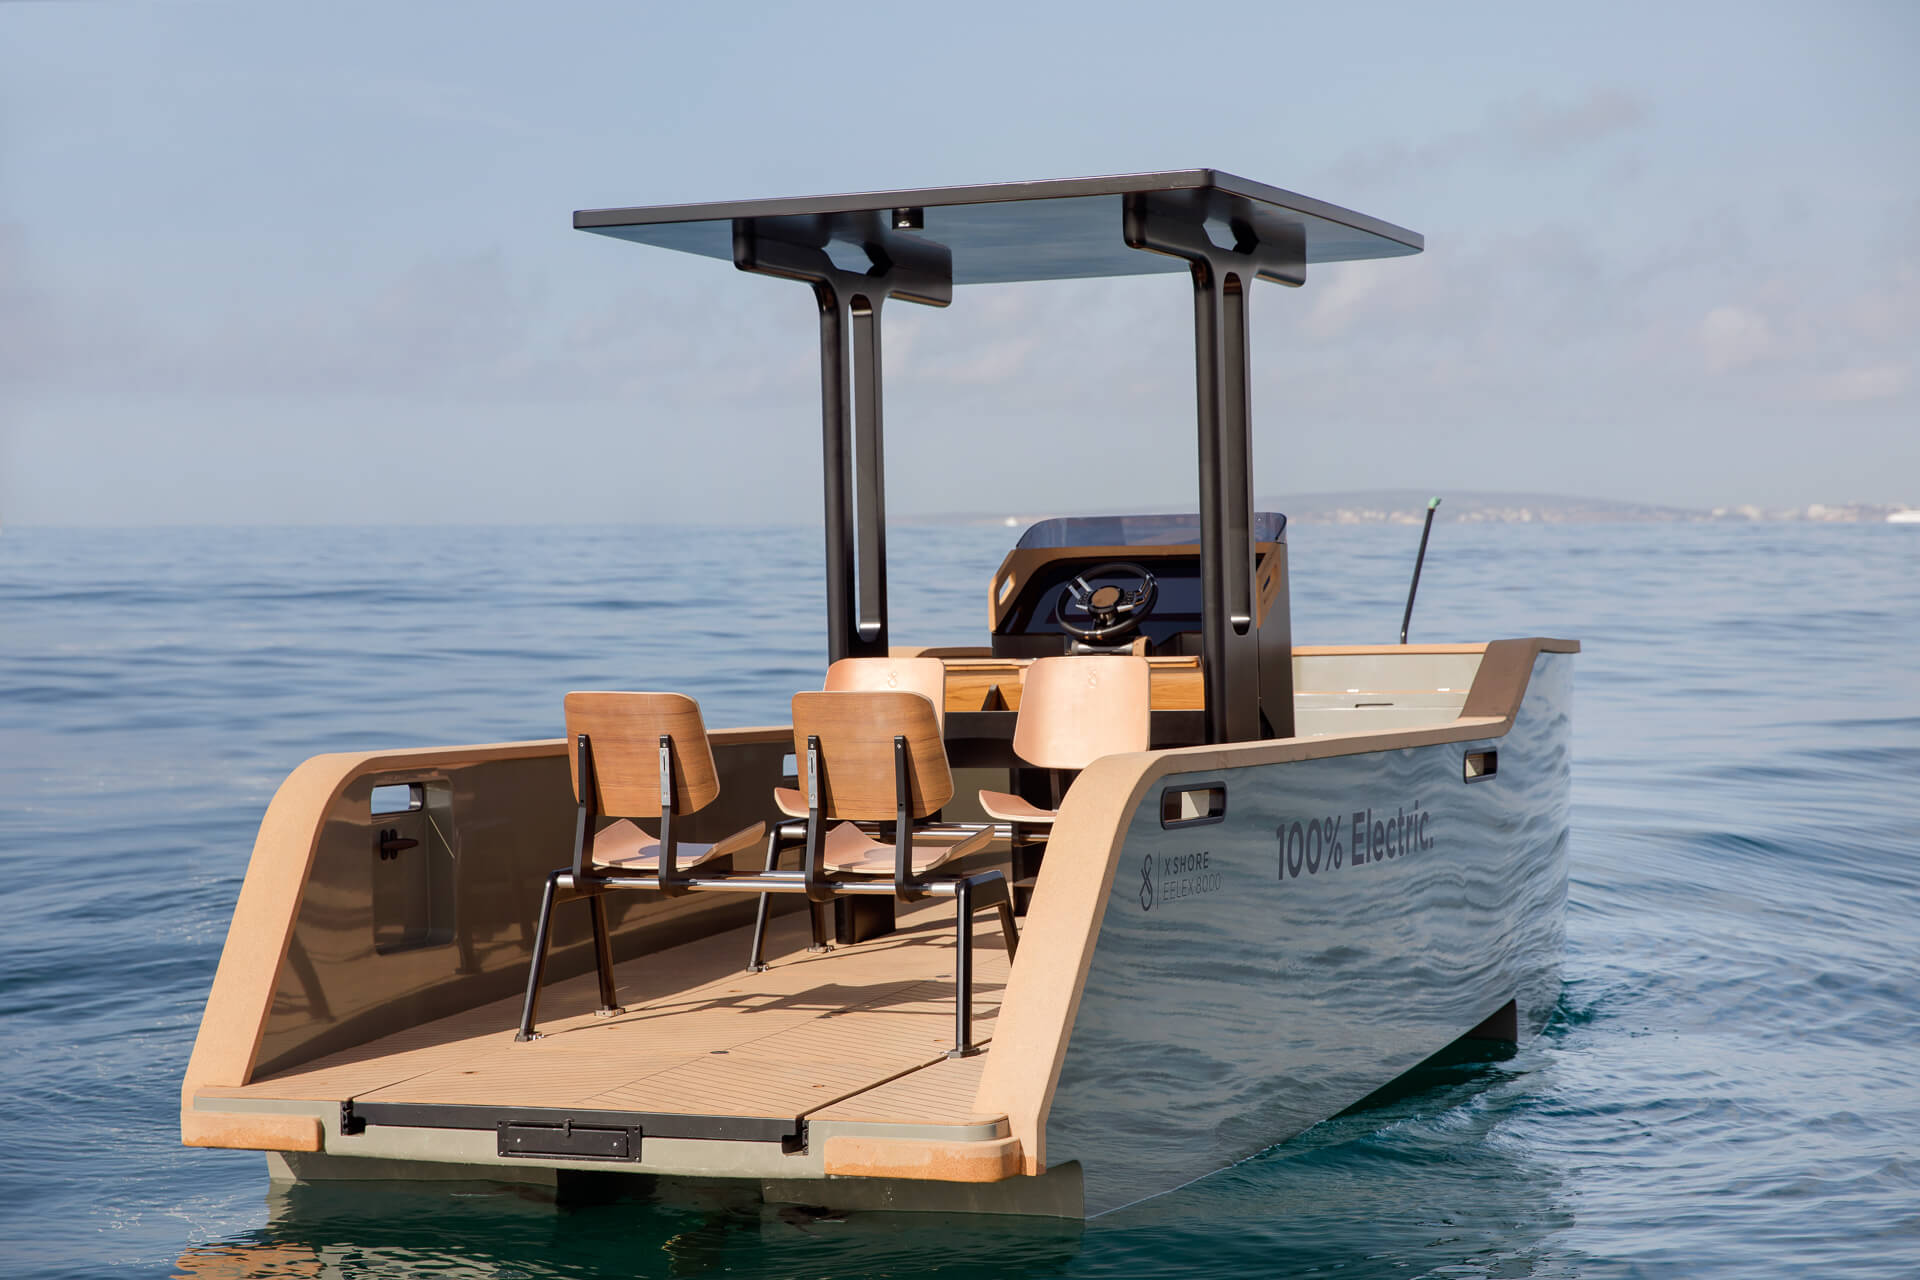 Picture of the X Shore Craft. An 100% eclectic boat. Overview